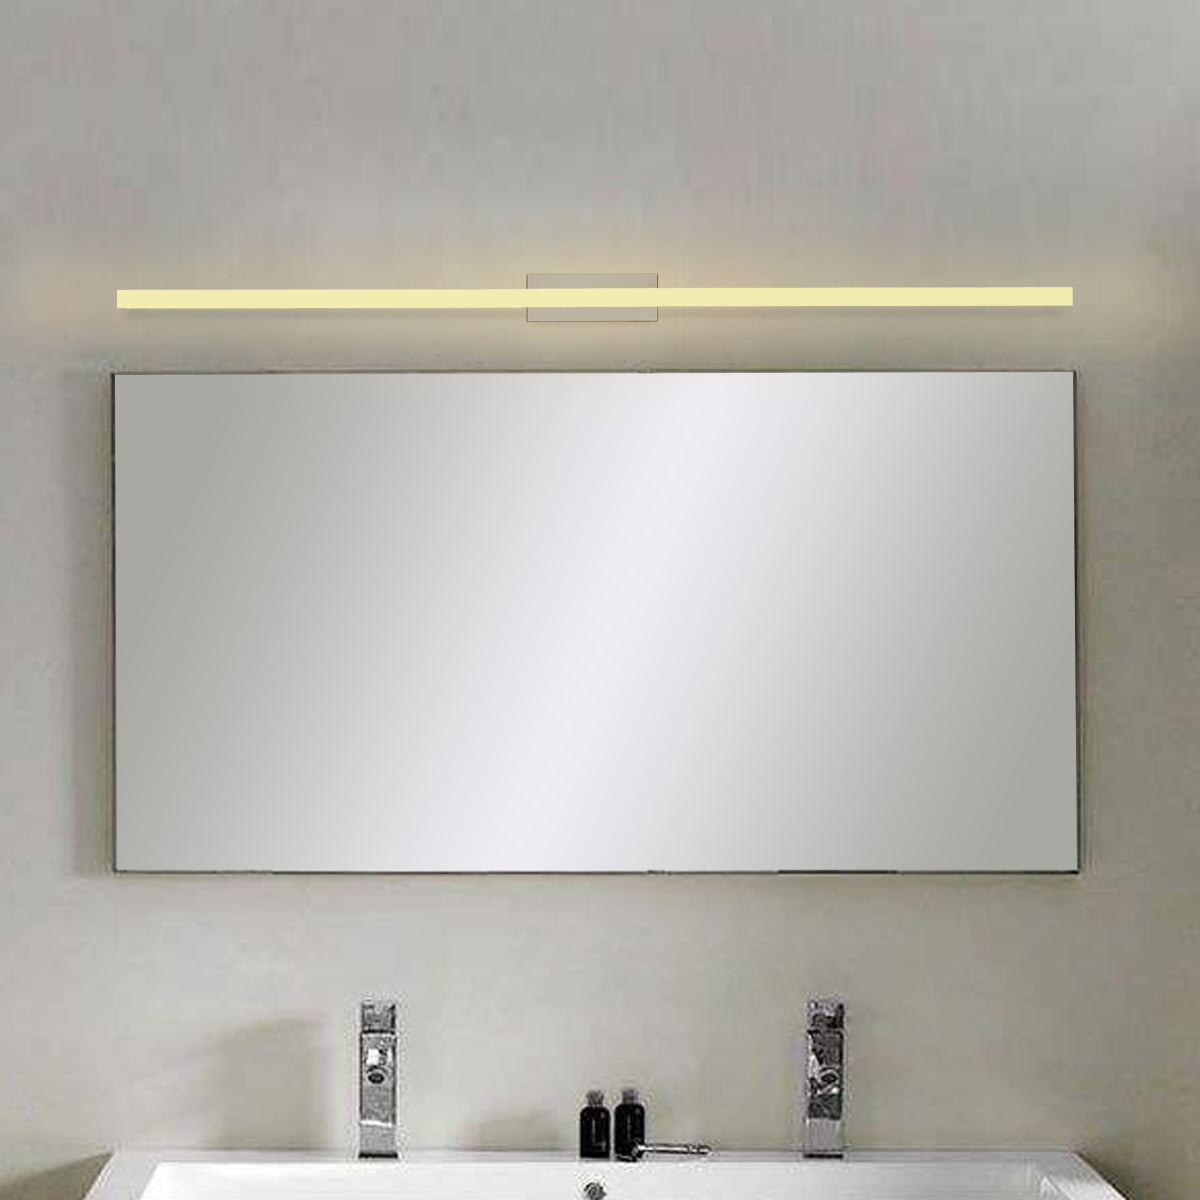 LED SMD Acrylic Wall Sconces Light Fixture Mirror Front Toilet Bedroom Cafe Lamp 